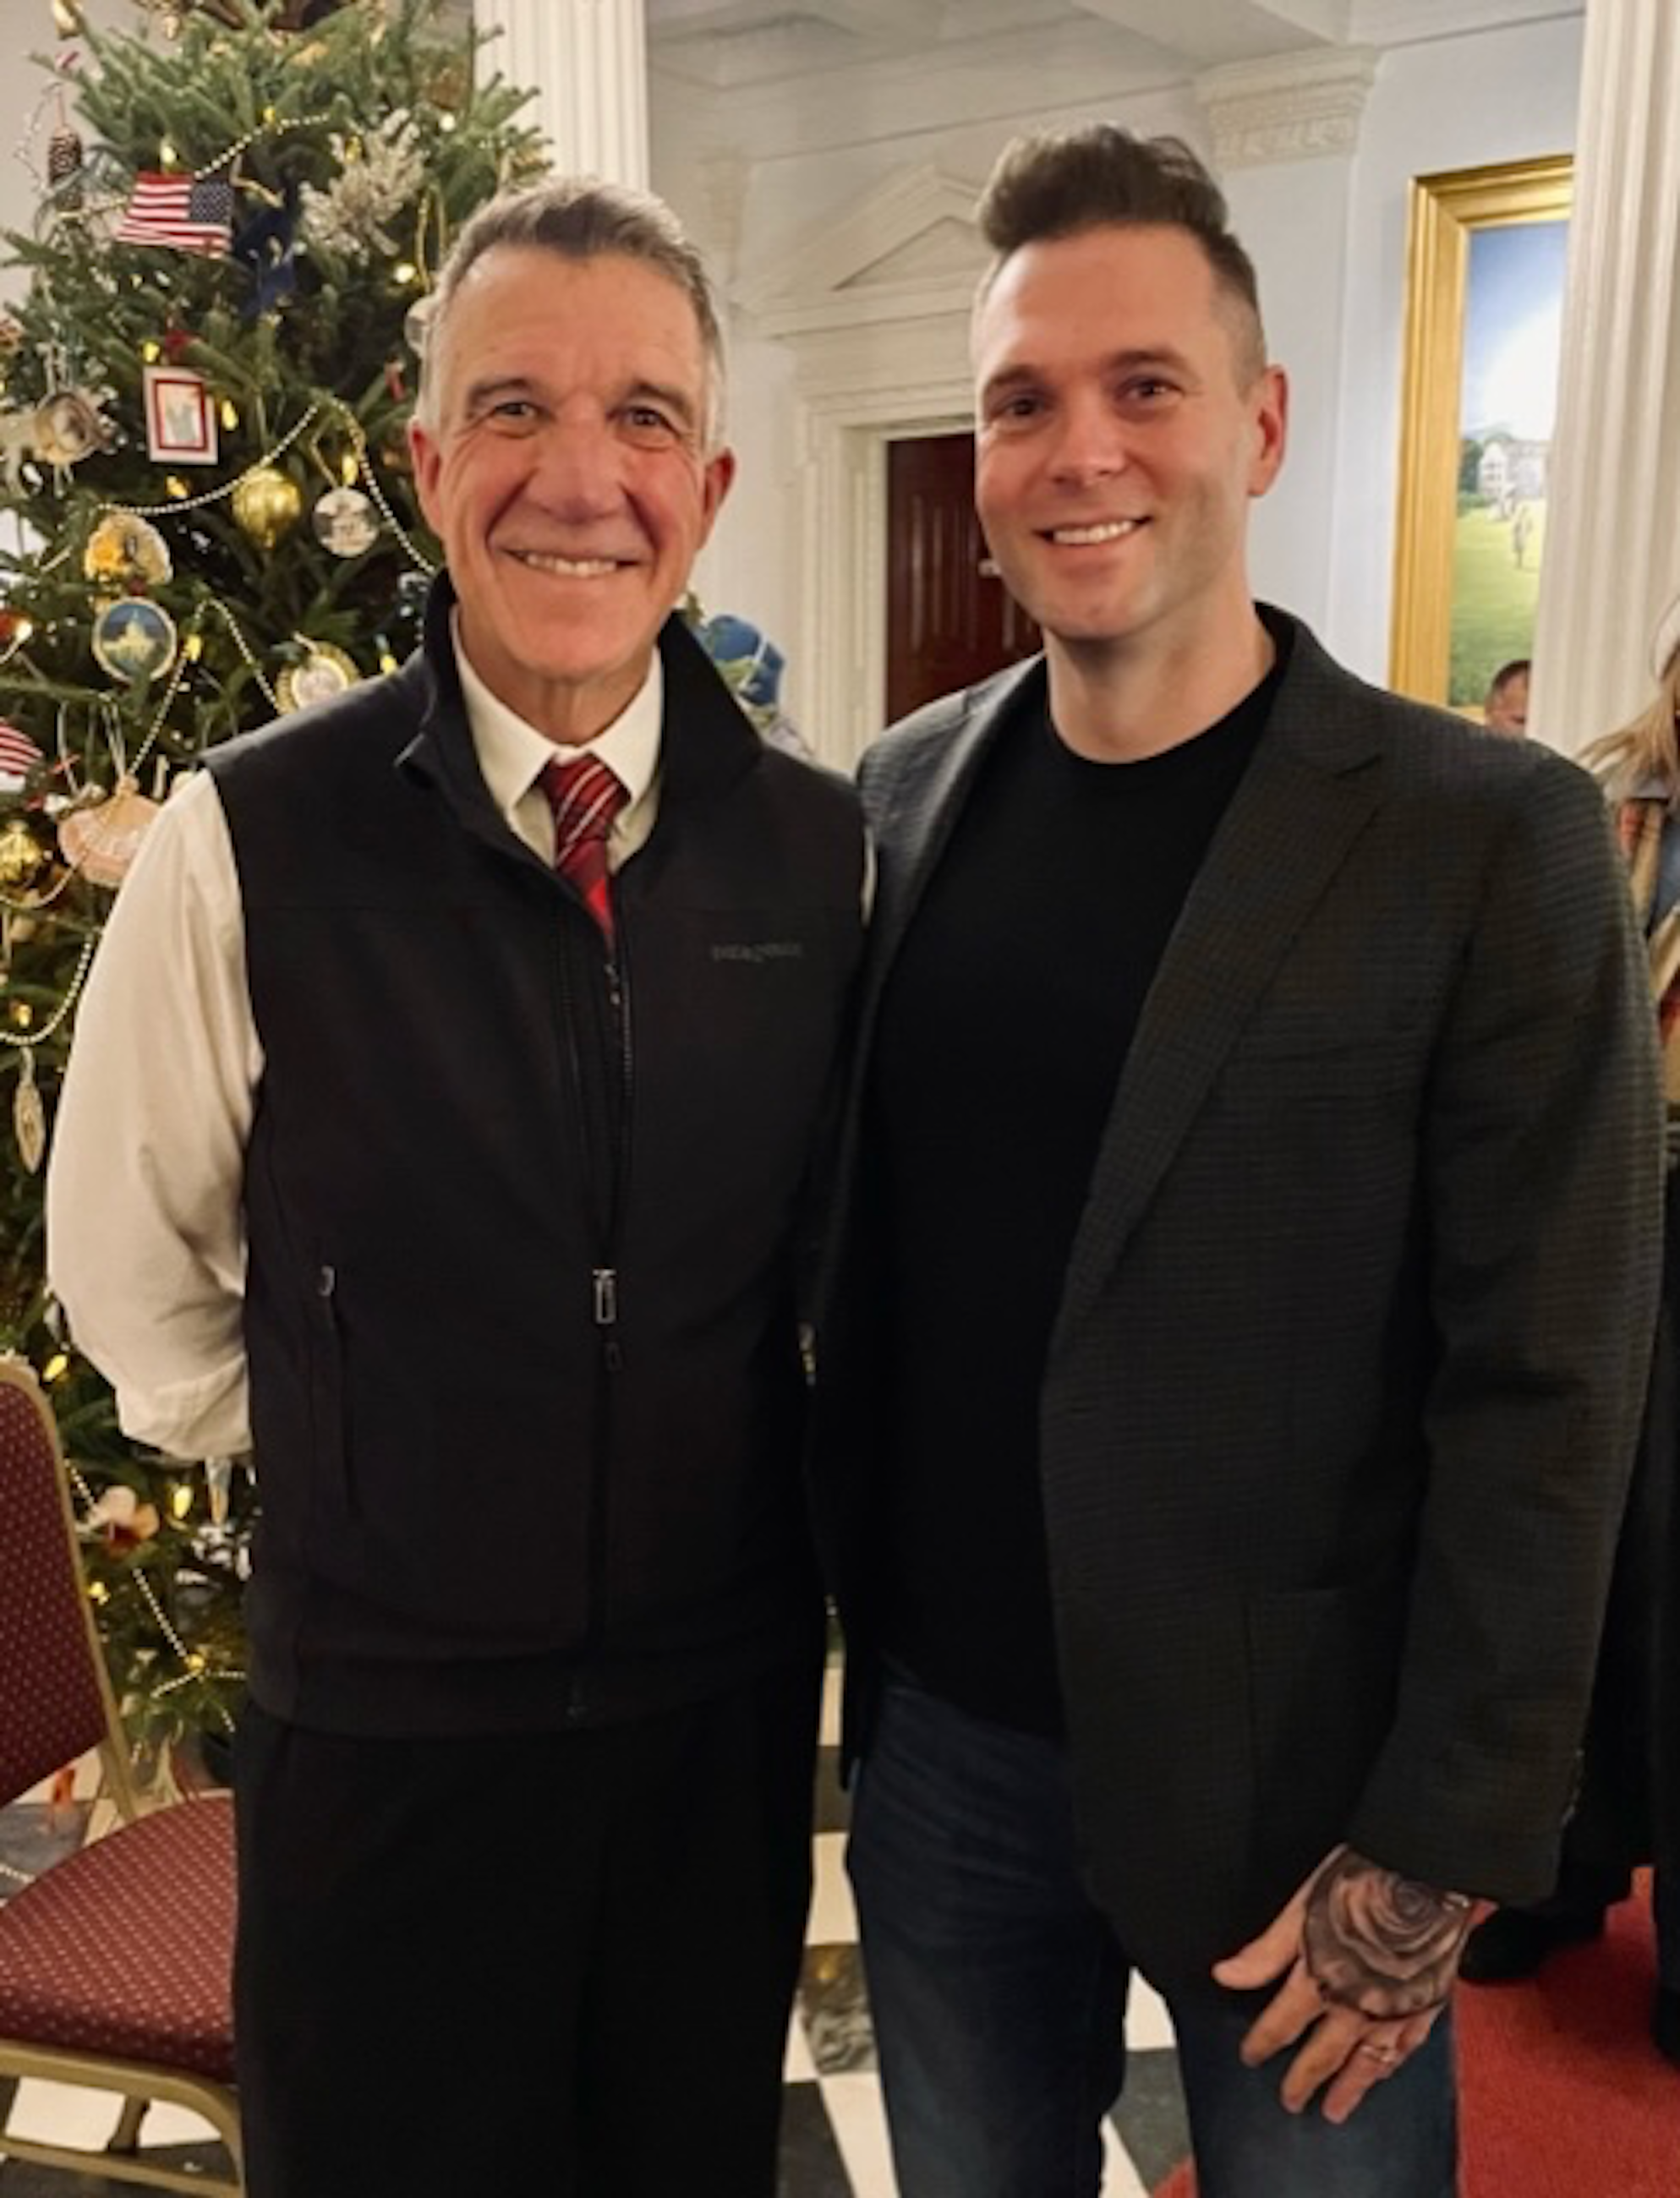 Me with Vermont Governor, Phill Scott